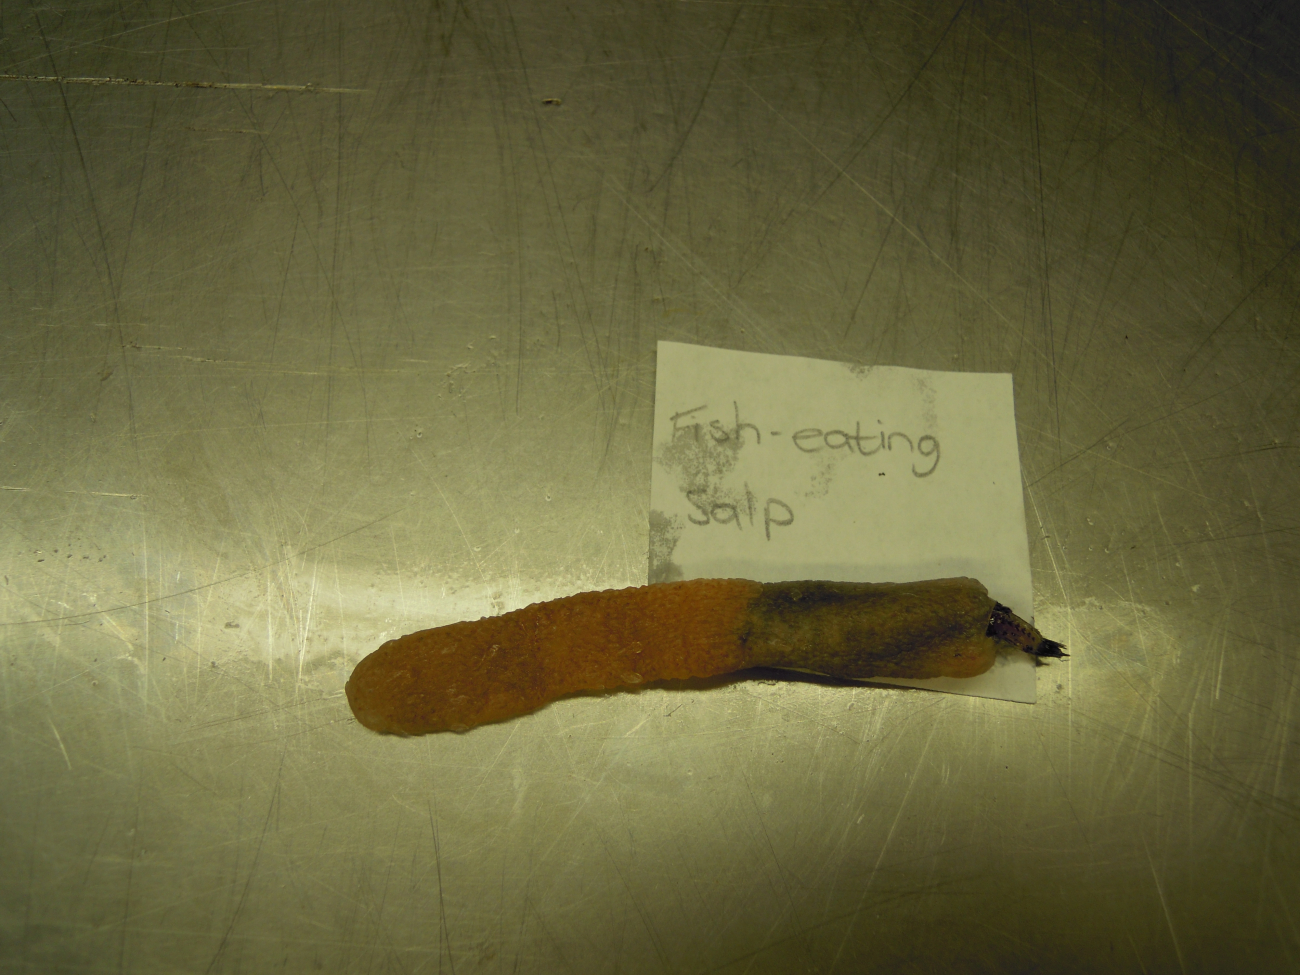 A fish-eating salp with a partially ingested fish